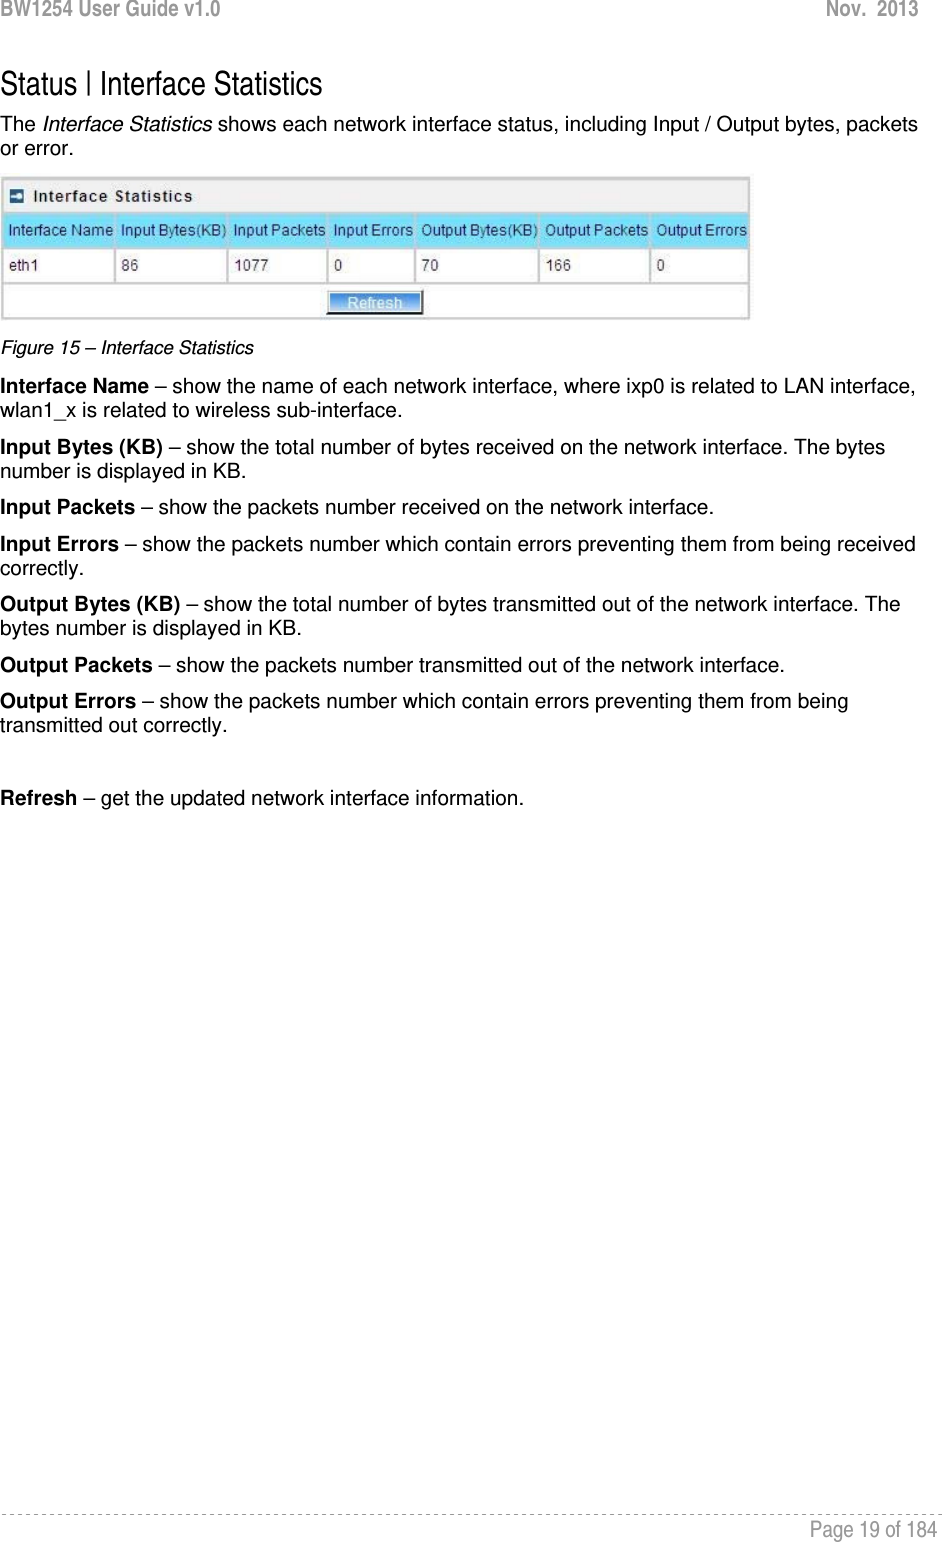 BW1254 User Guide v1.0  Nov.  2013     Page 19 of 184   Status | Interface Statistics The Interface Statistics shows each network interface status, including Input / Output bytes, packets or error.  Figure 15 – Interface Statistics Interface Name – show the name of each network interface, where ixp0 is related to LAN interface, wlan1_x is related to wireless sub-interface. Input Bytes (KB) – show the total number of bytes received on the network interface. The bytes number is displayed in KB. Input Packets – show the packets number received on the network interface. Input Errors – show the packets number which contain errors preventing them from being received correctly. Output Bytes (KB) – show the total number of bytes transmitted out of the network interface. The bytes number is displayed in KB. Output Packets – show the packets number transmitted out of the network interface. Output Errors – show the packets number which contain errors preventing them from being transmitted out correctly.  Refresh – get the updated network interface information.  